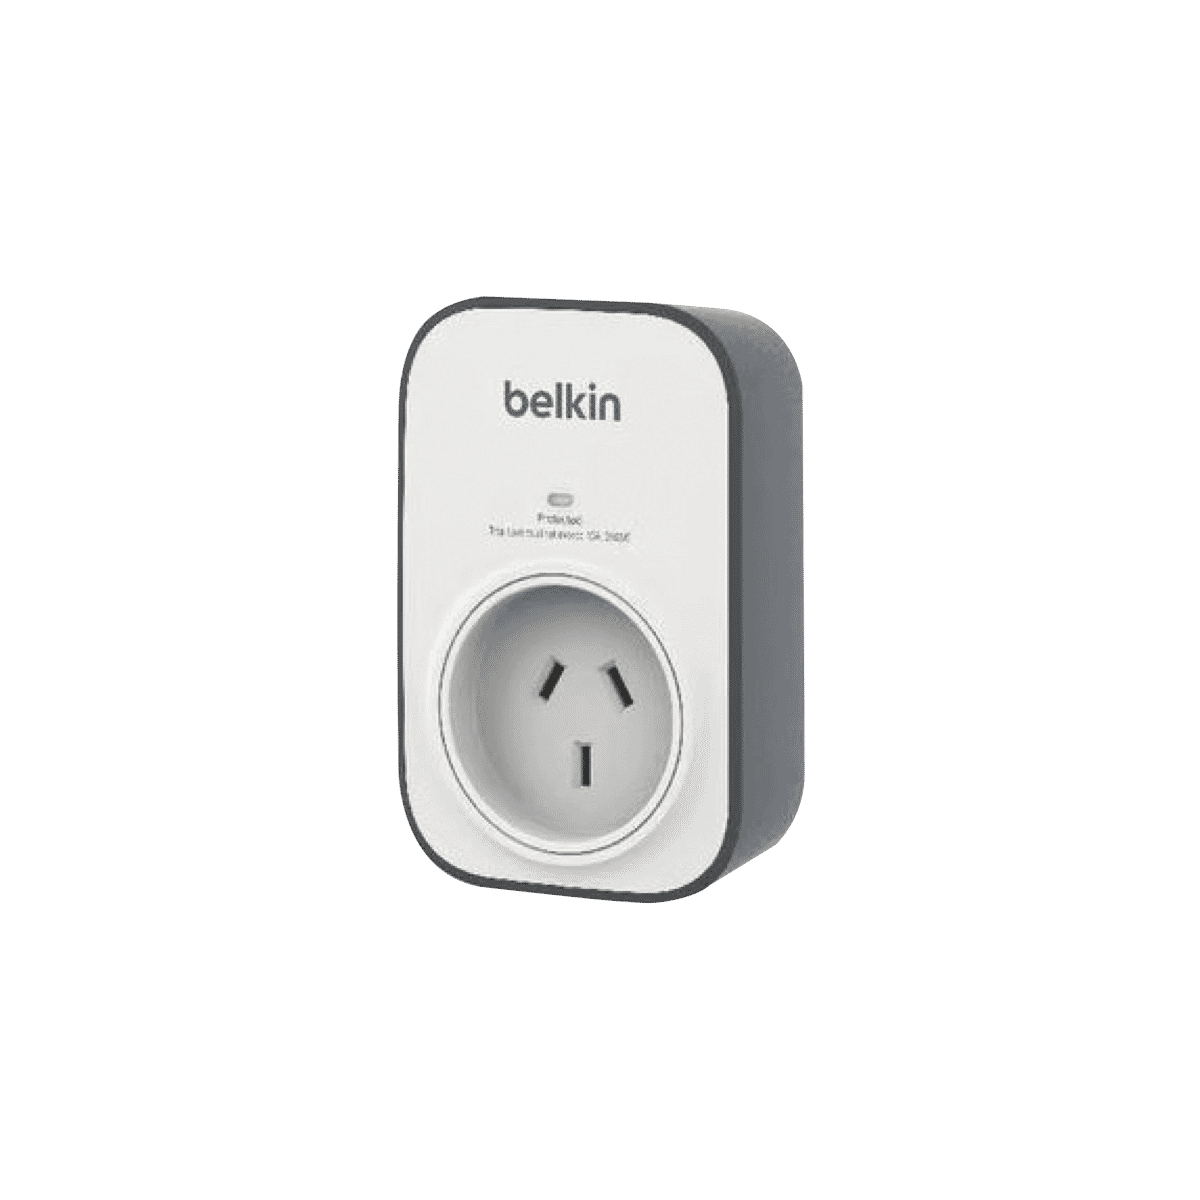 Belkin BSV1102AU SurgeCube 1 Outlet Surge Protector at The